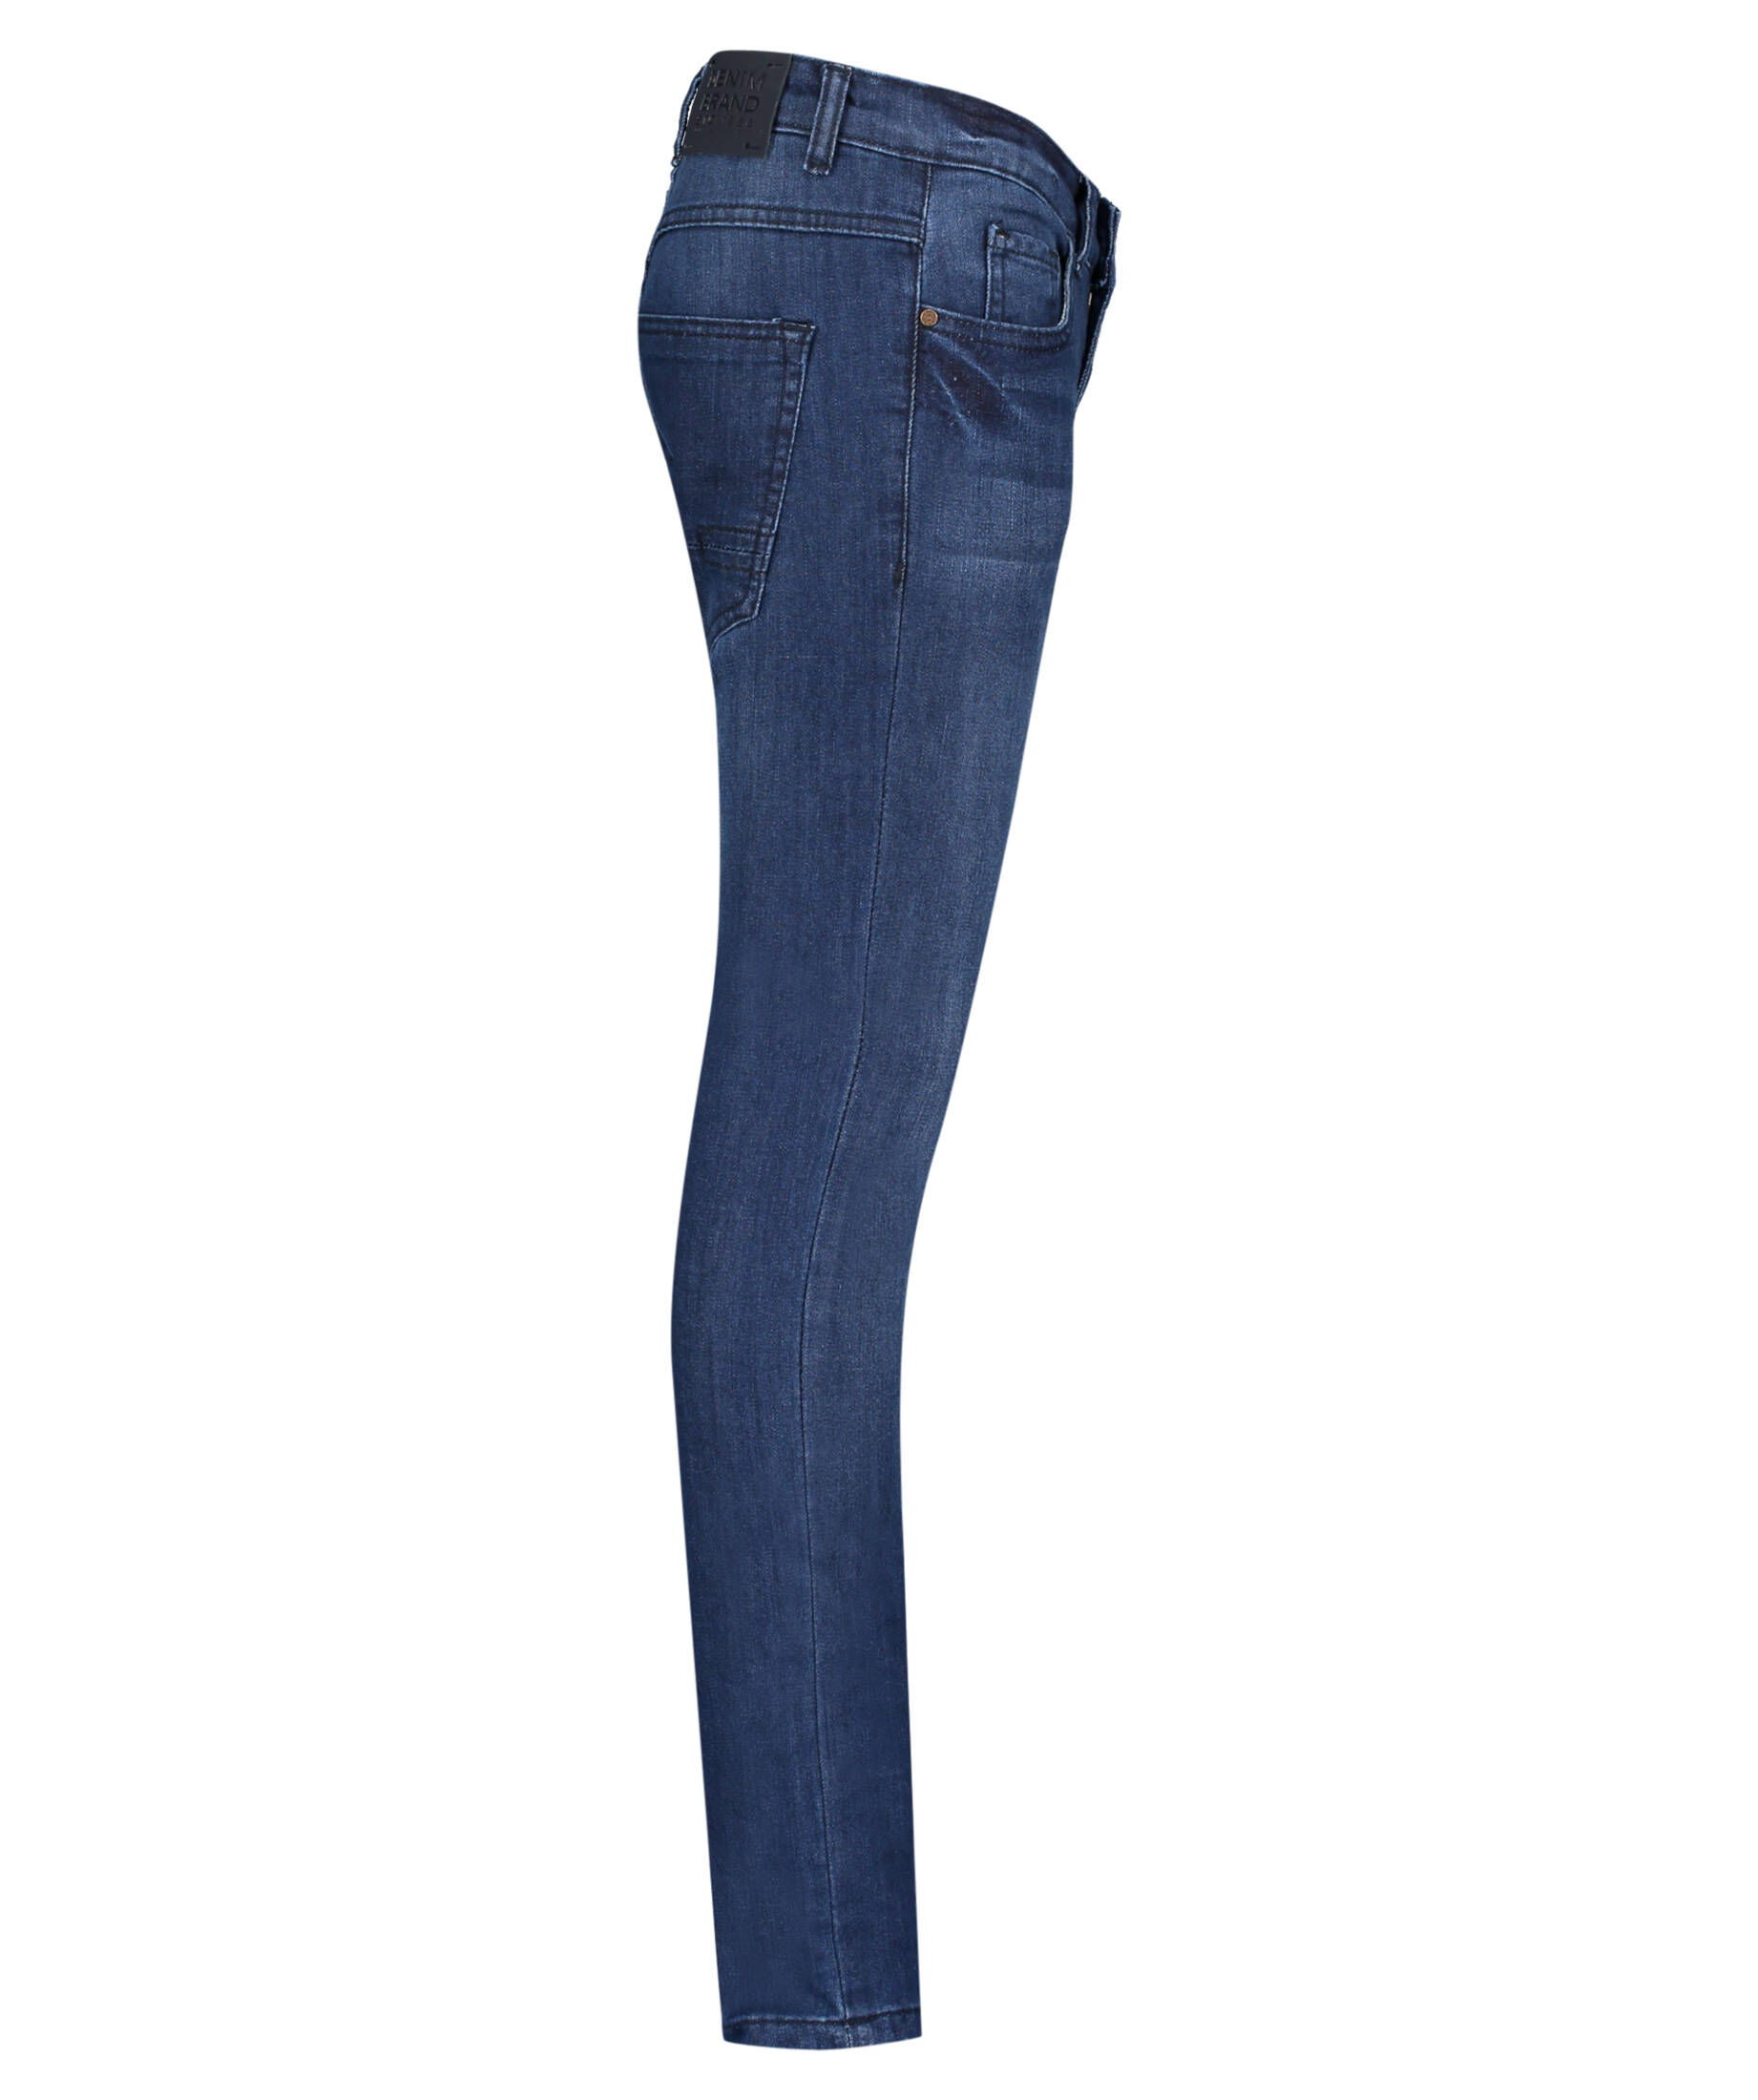 Fit Skinny Jeans \